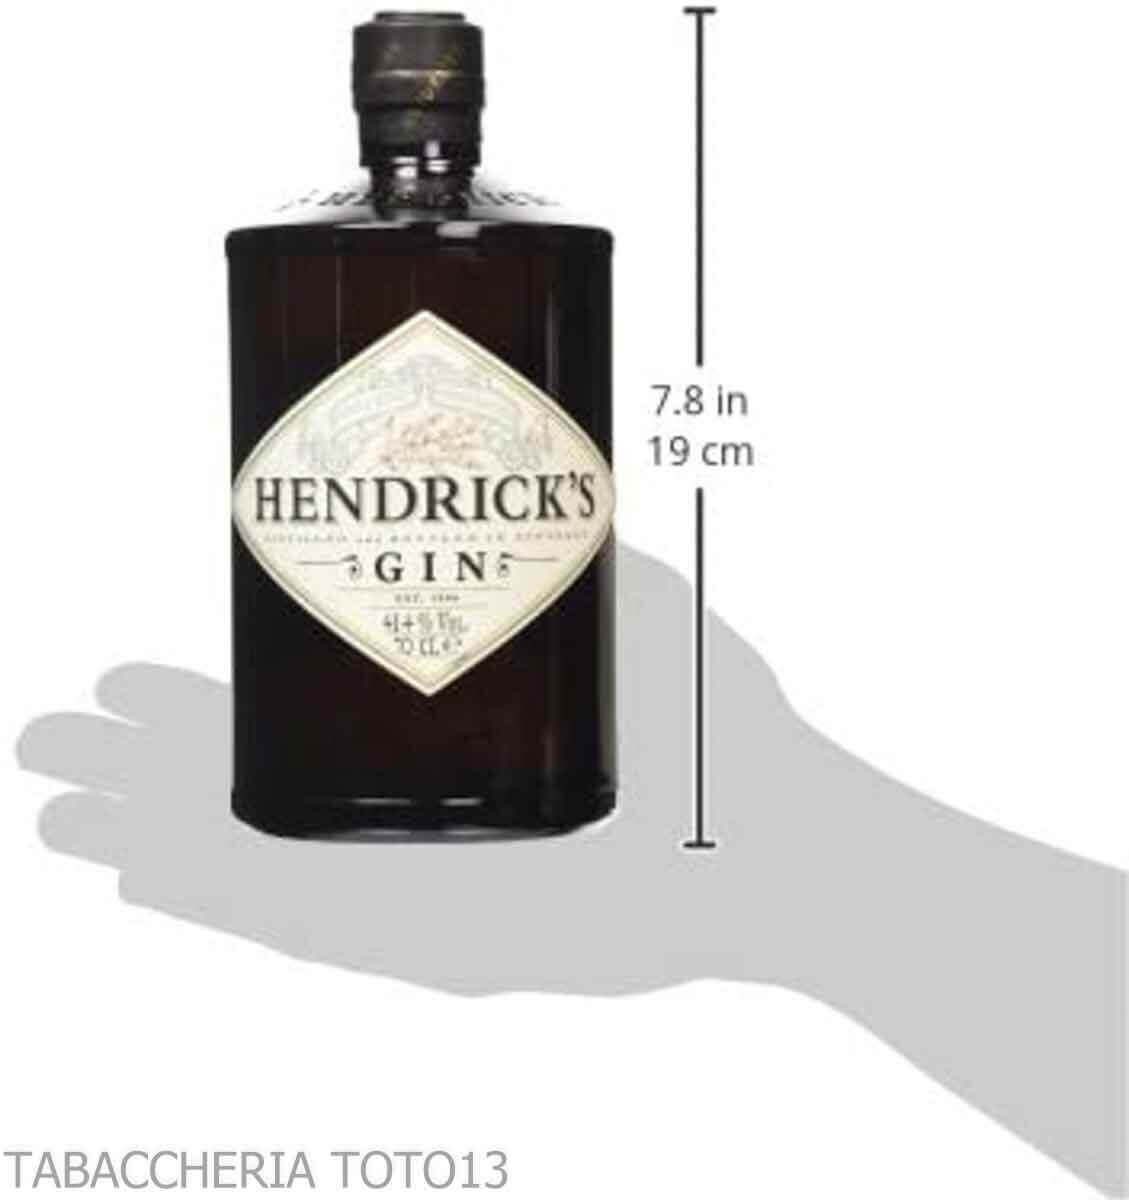 Hendrick's Gin will win you over in the first sip | Perfect gin&tonic